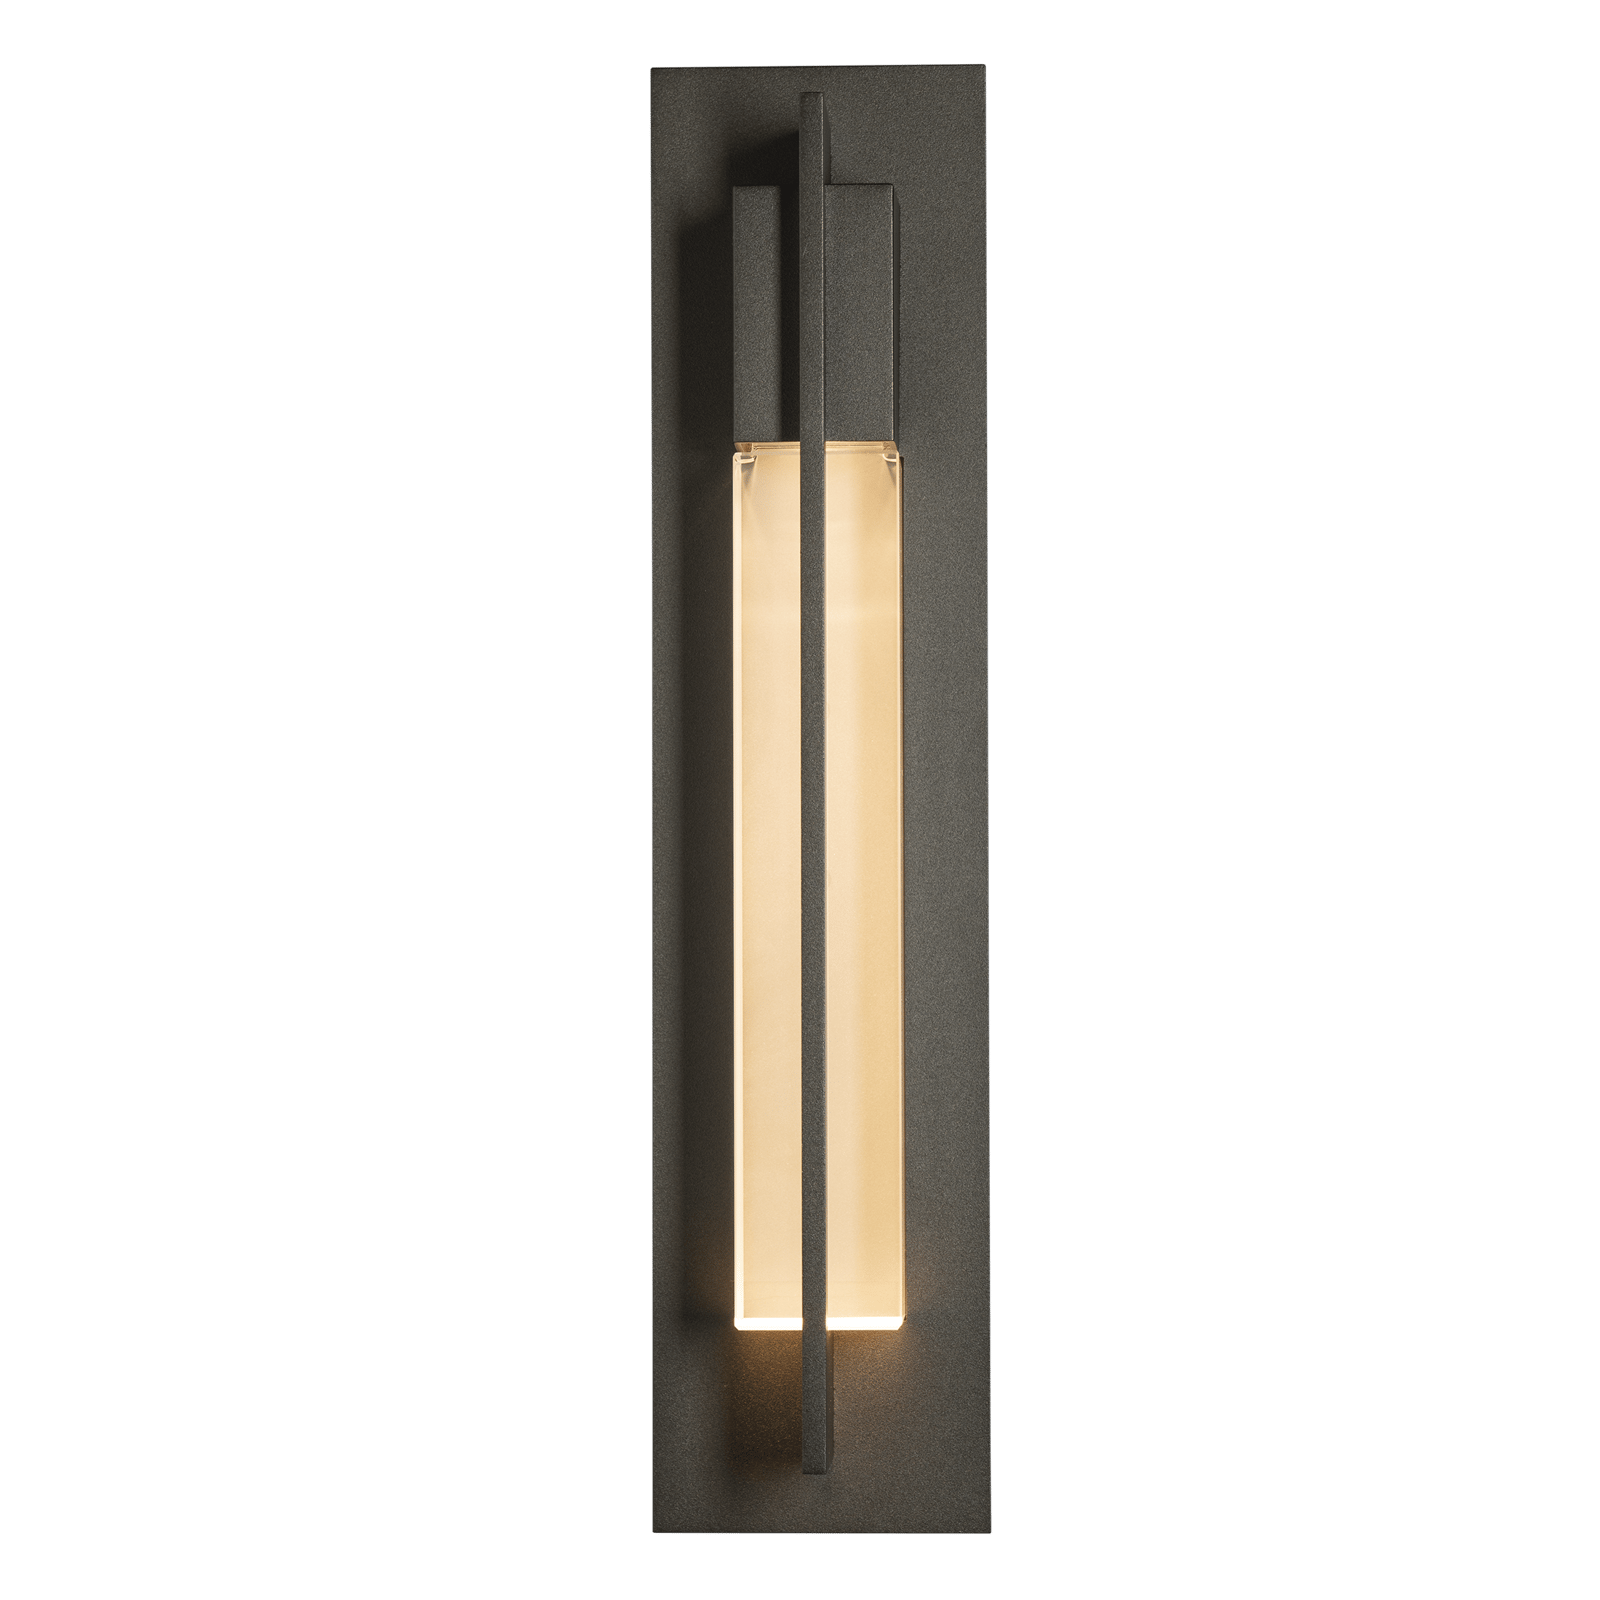 Hubbardton Forge Axis Large Outdoor Sconce